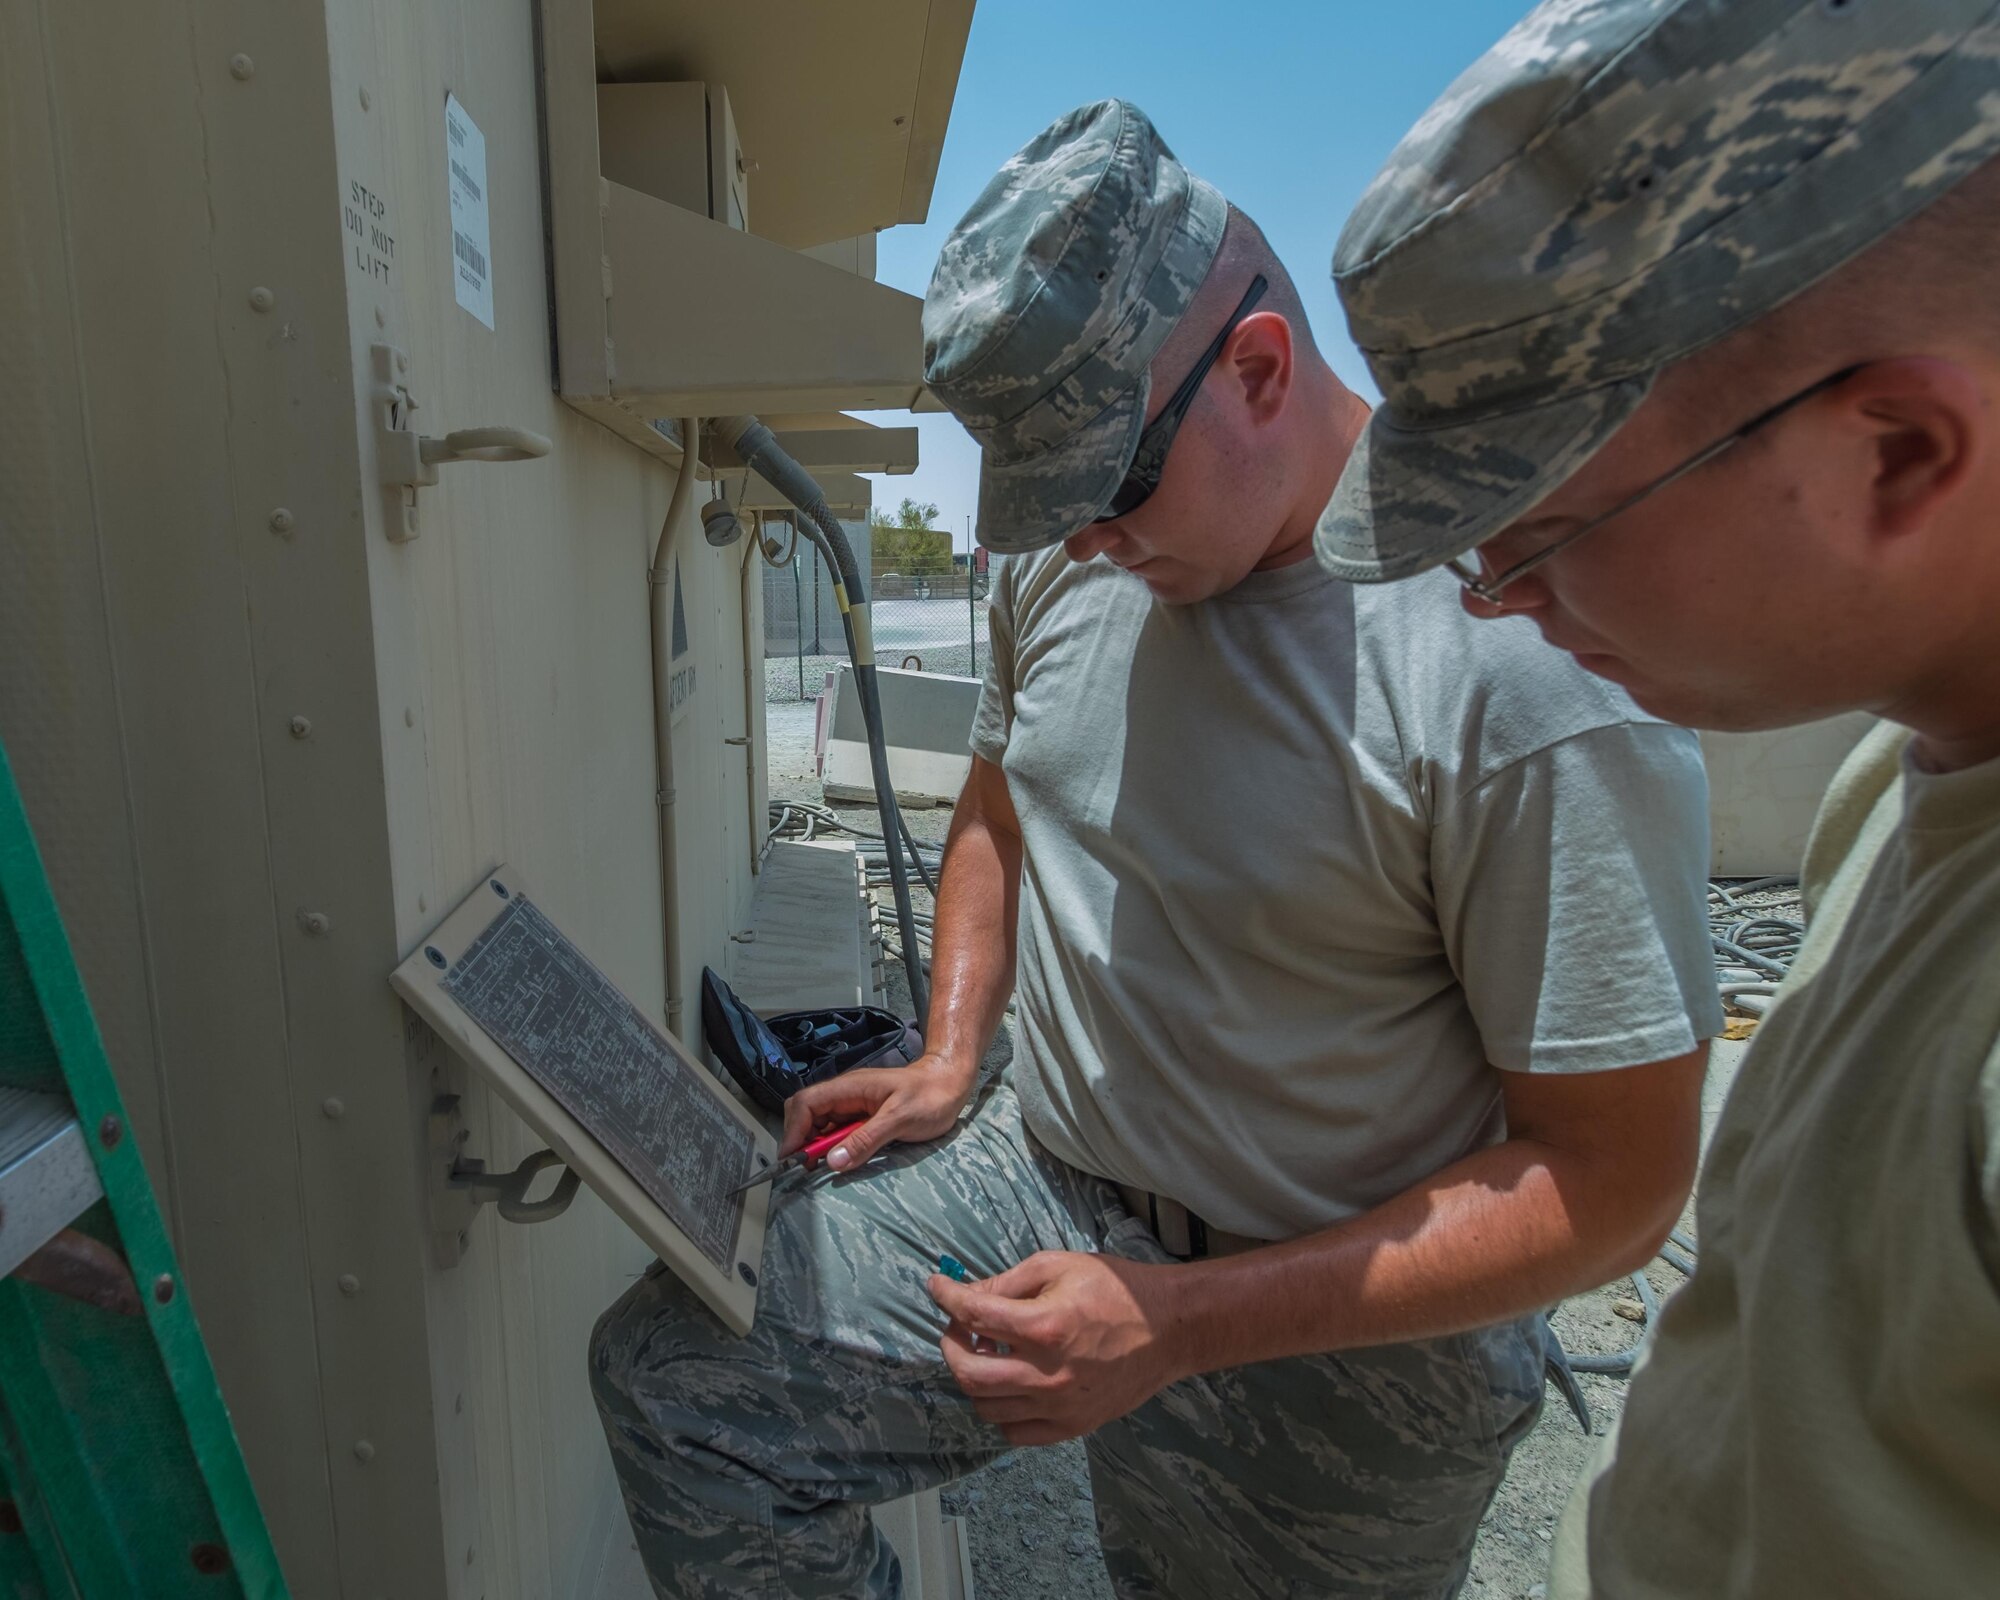 Staff Sgt. Zachery, left, and Senior Airman Timothy, both 380th Expeditionary Civil Engineer Squadron heating, ventilation, and air conditioning technicians, examine a wiring diagram August 8, 2017, at Al Dhafra Air Base, United Arab Emirates.